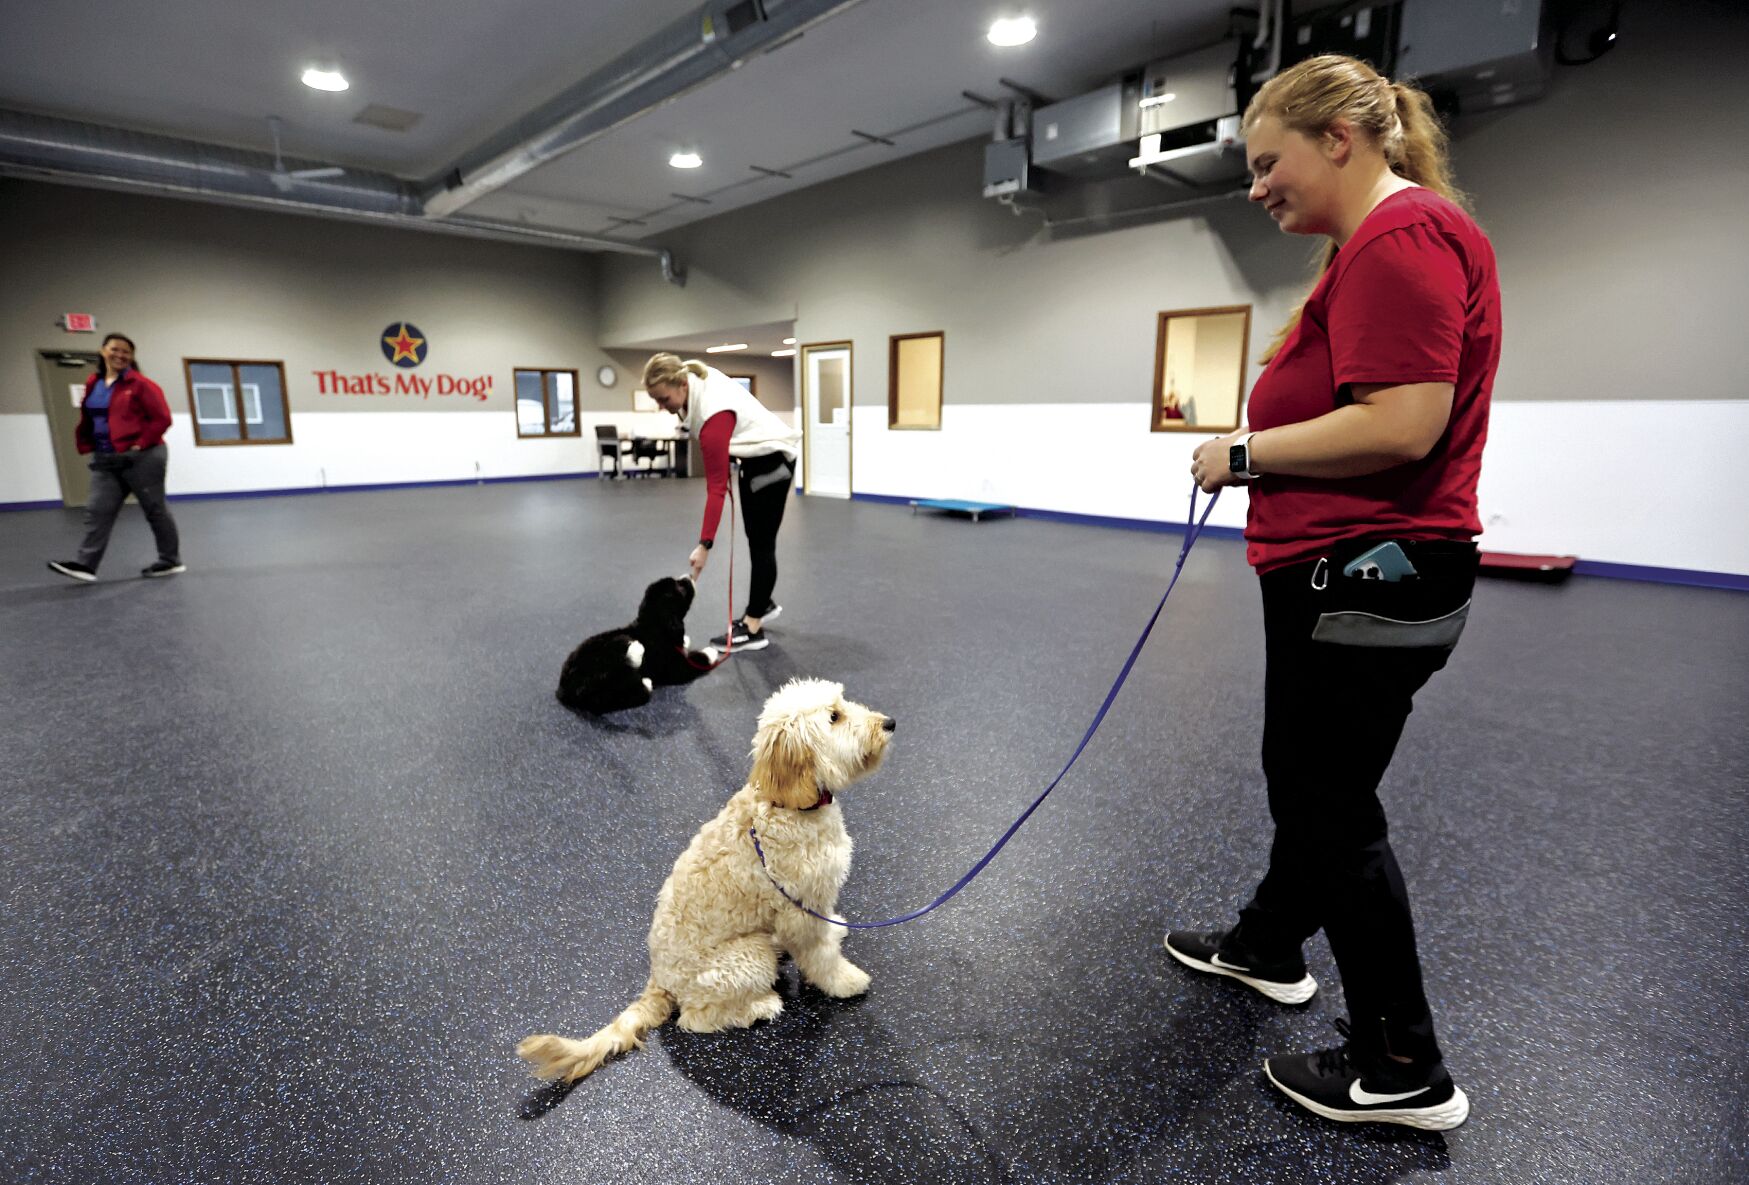 Tracy Clemens (center) works with Daisy while Madison Naeger (right) works on commands with Olive at That’s My Dog! in Dubuque. The business has expanded its space and services.    PHOTO CREDIT: JESSICA REILLY